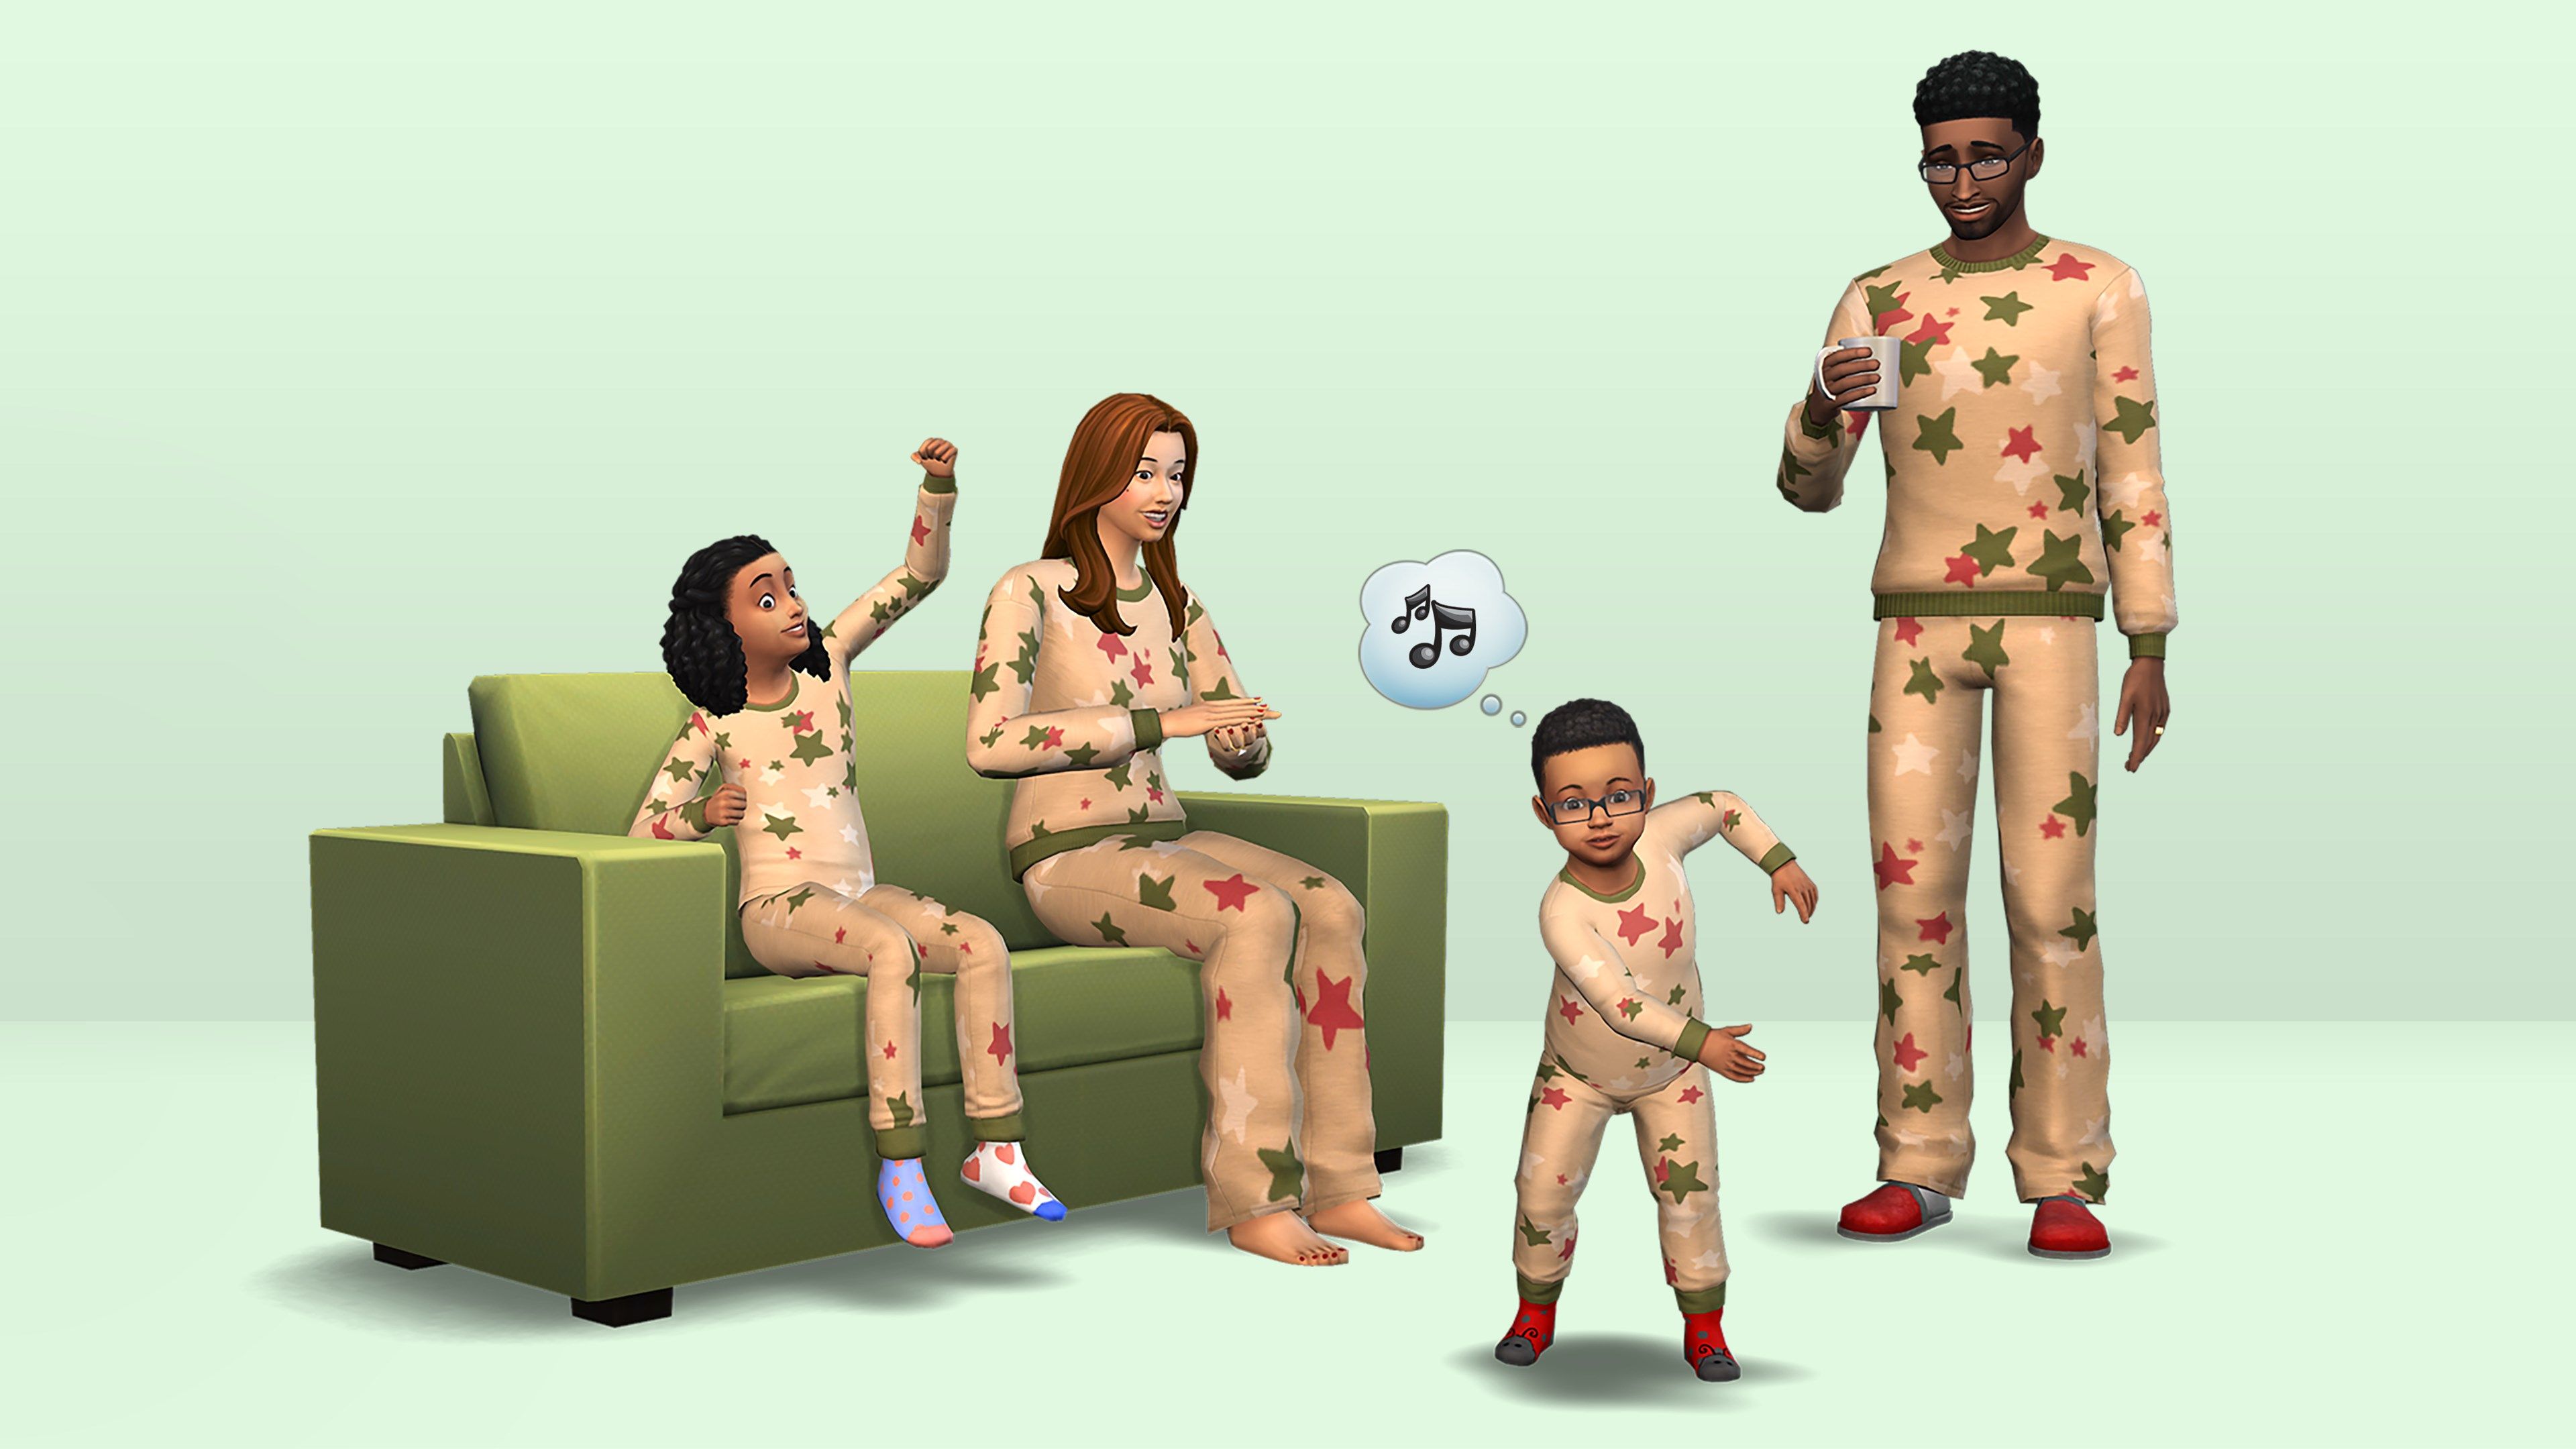 The Sims 4 responds to complaints after releasing console-exclusive content